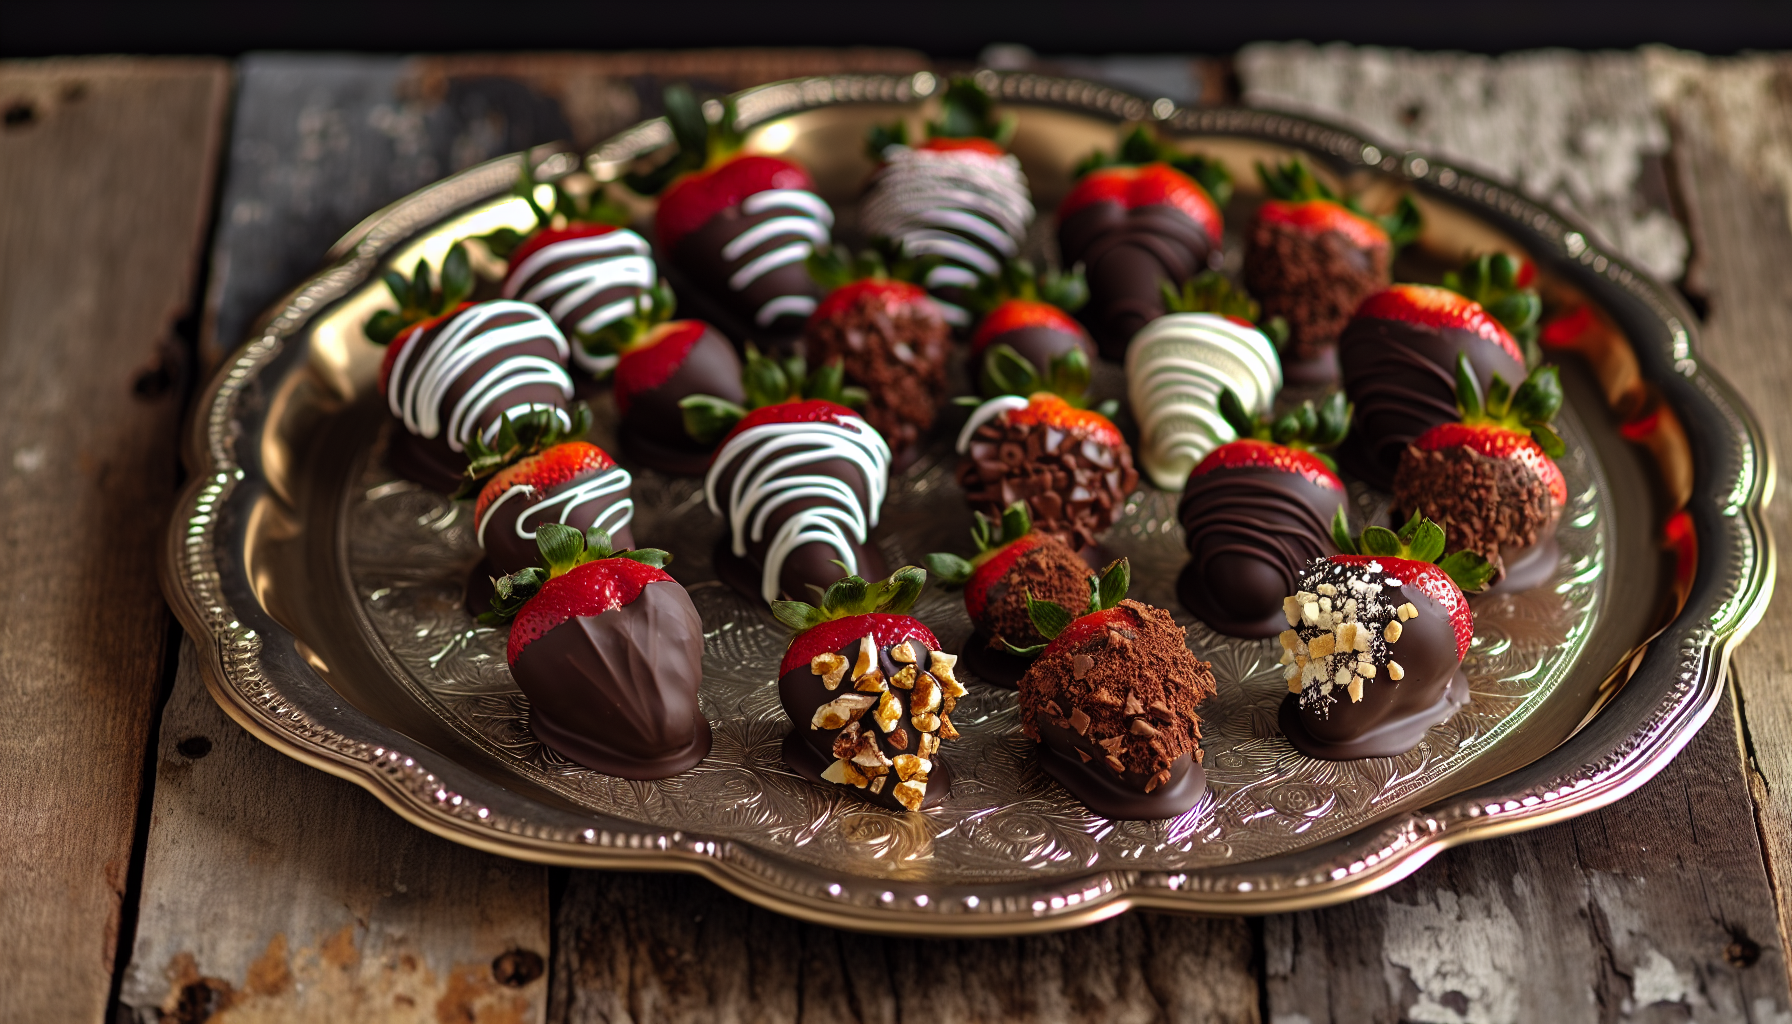 Decorated chocolate-covered strawberries on a serving tray